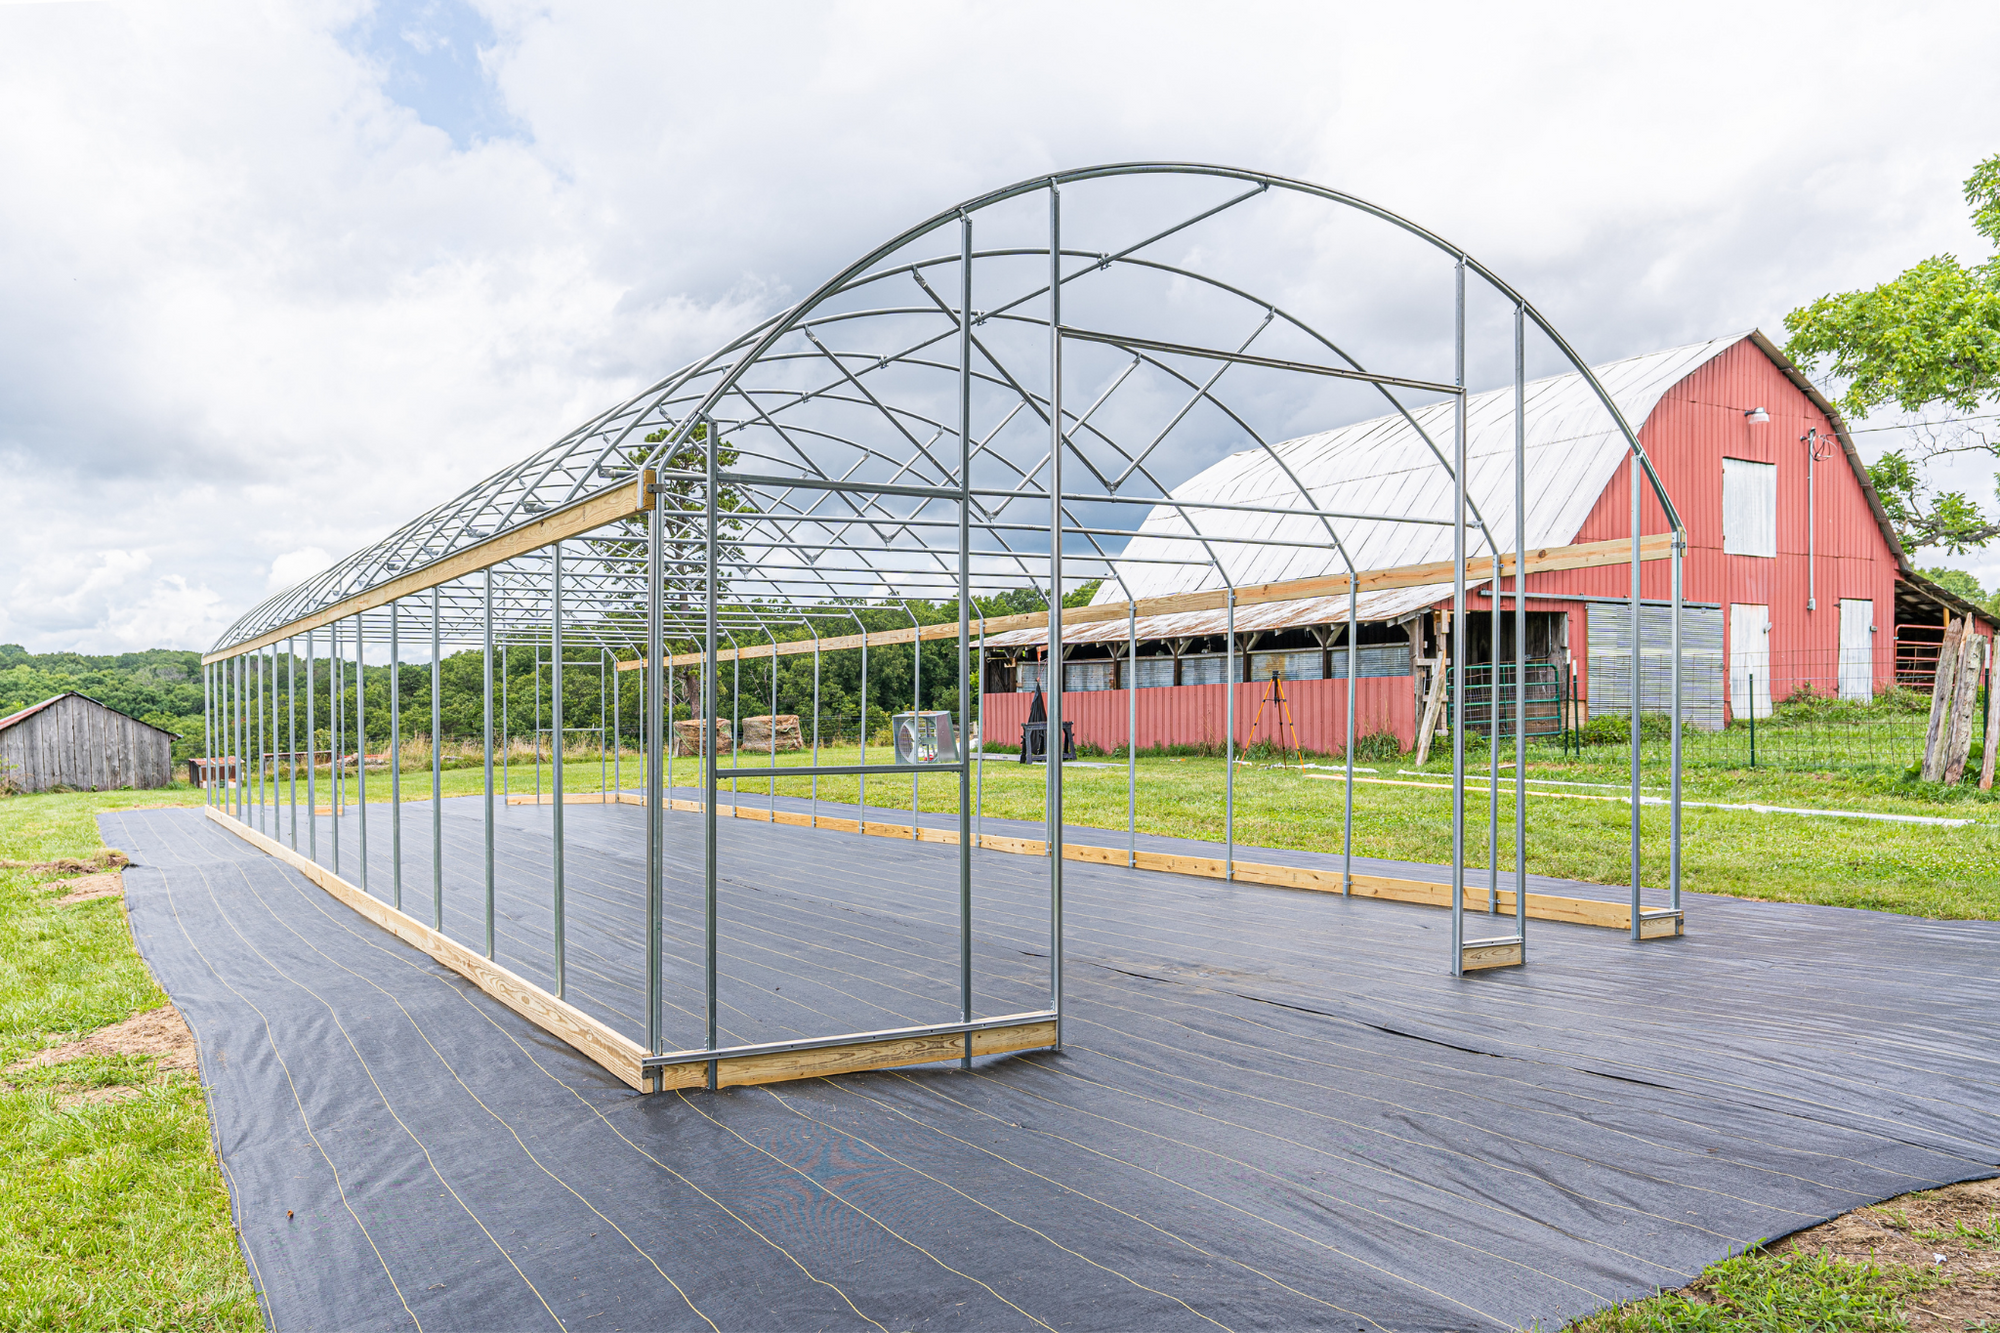 Additional Greenhouse Assembly Instructions